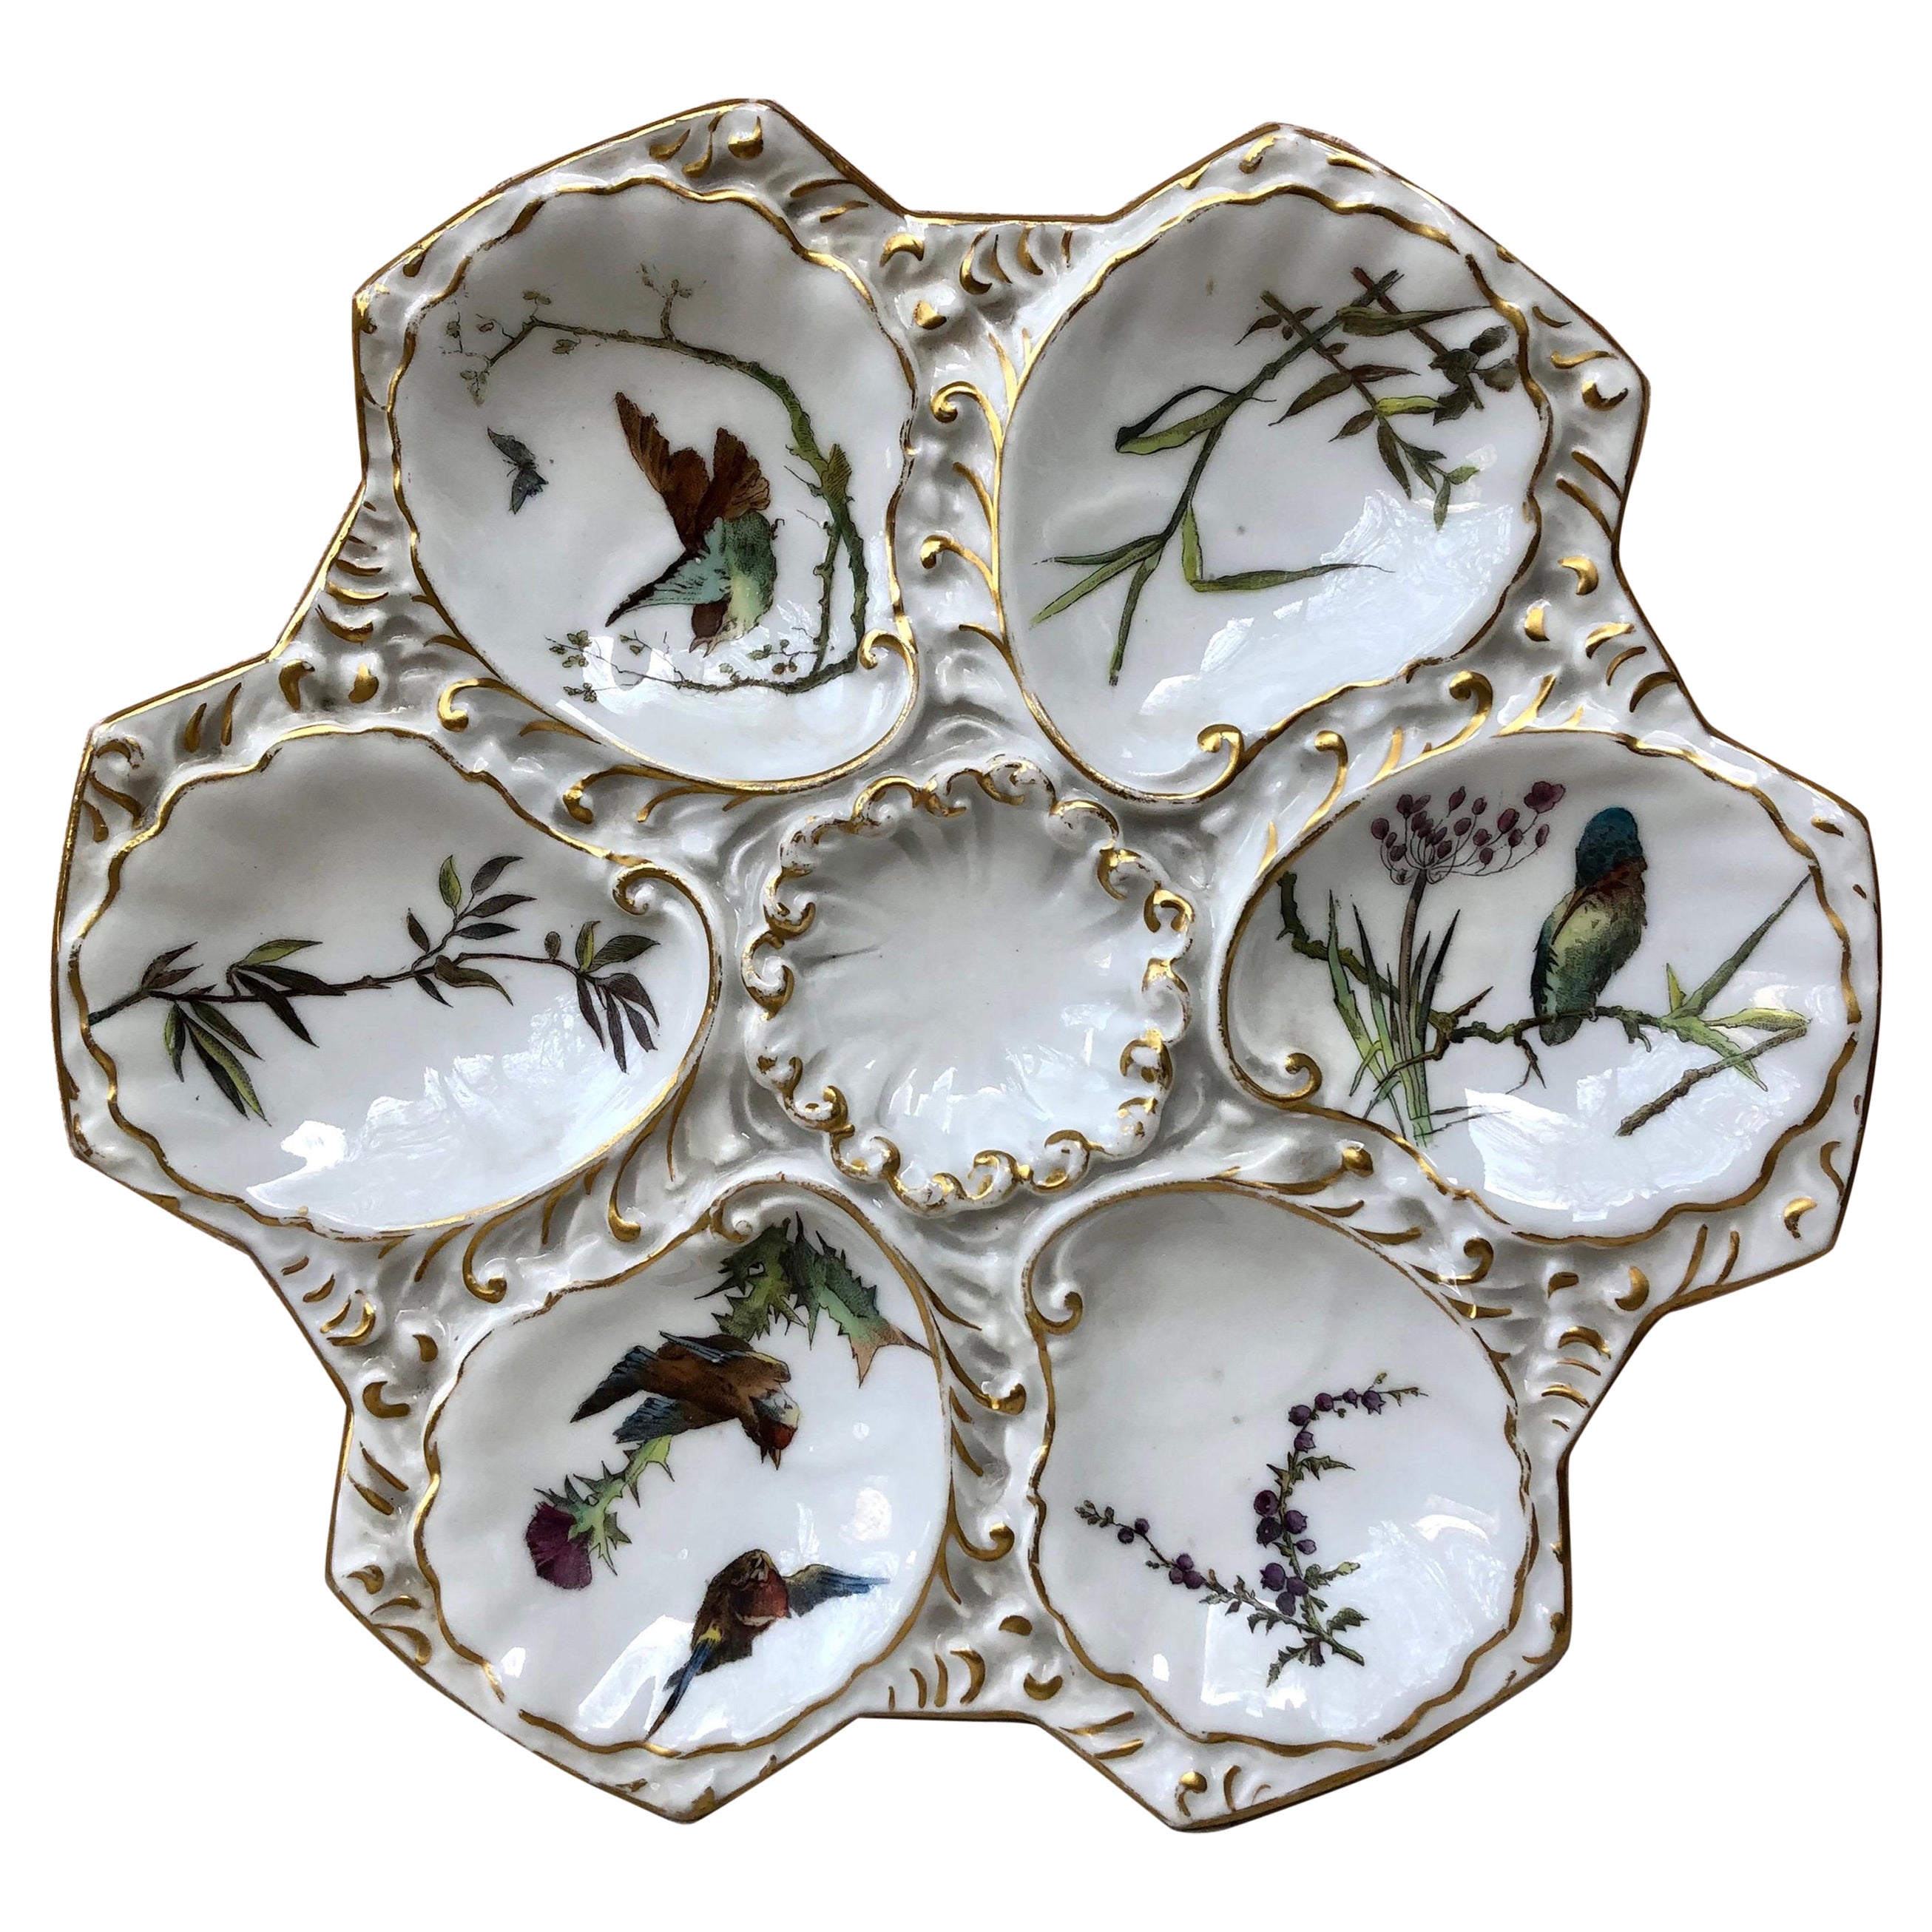 Porcelain Oyster Plate Limoges with Birds Circa 1900